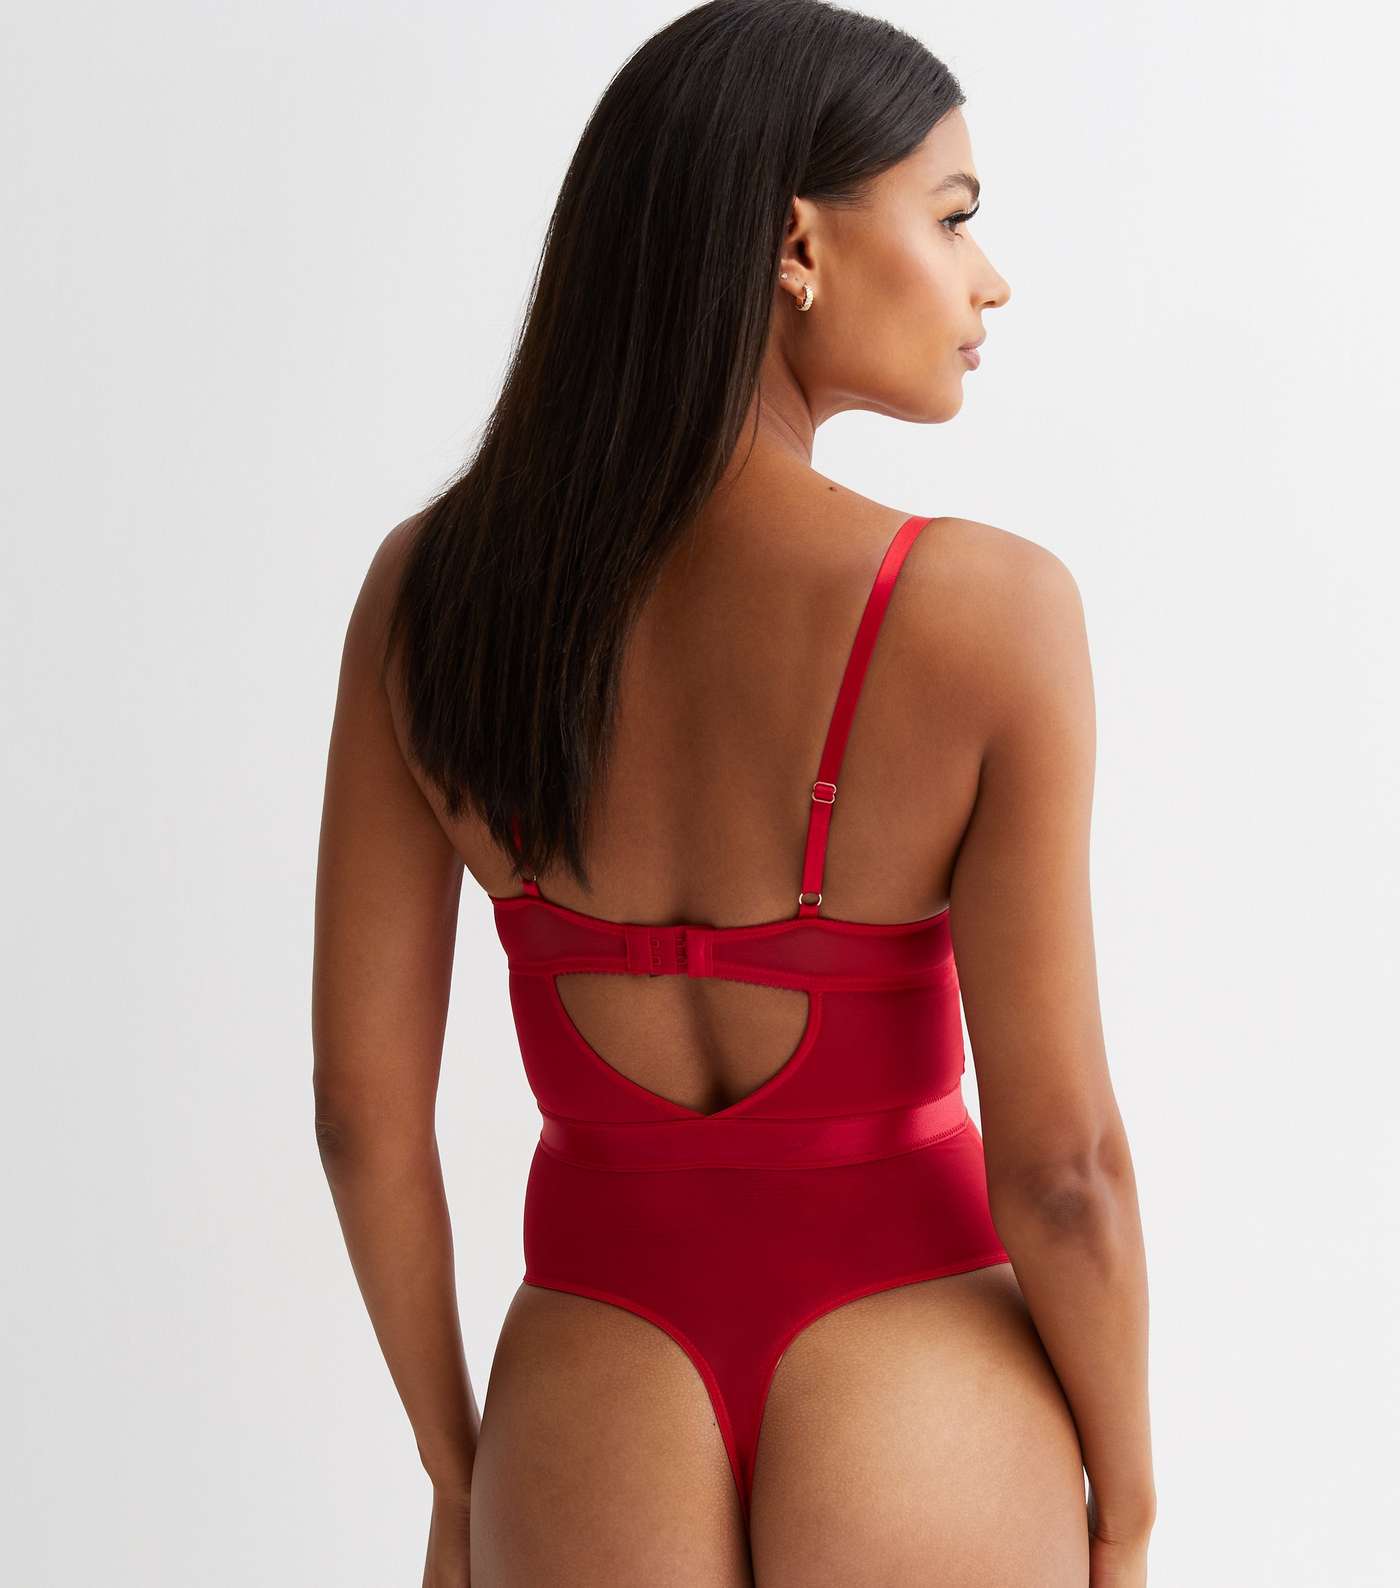 Red Lace Underwired Push Up Bodysuit Image 4